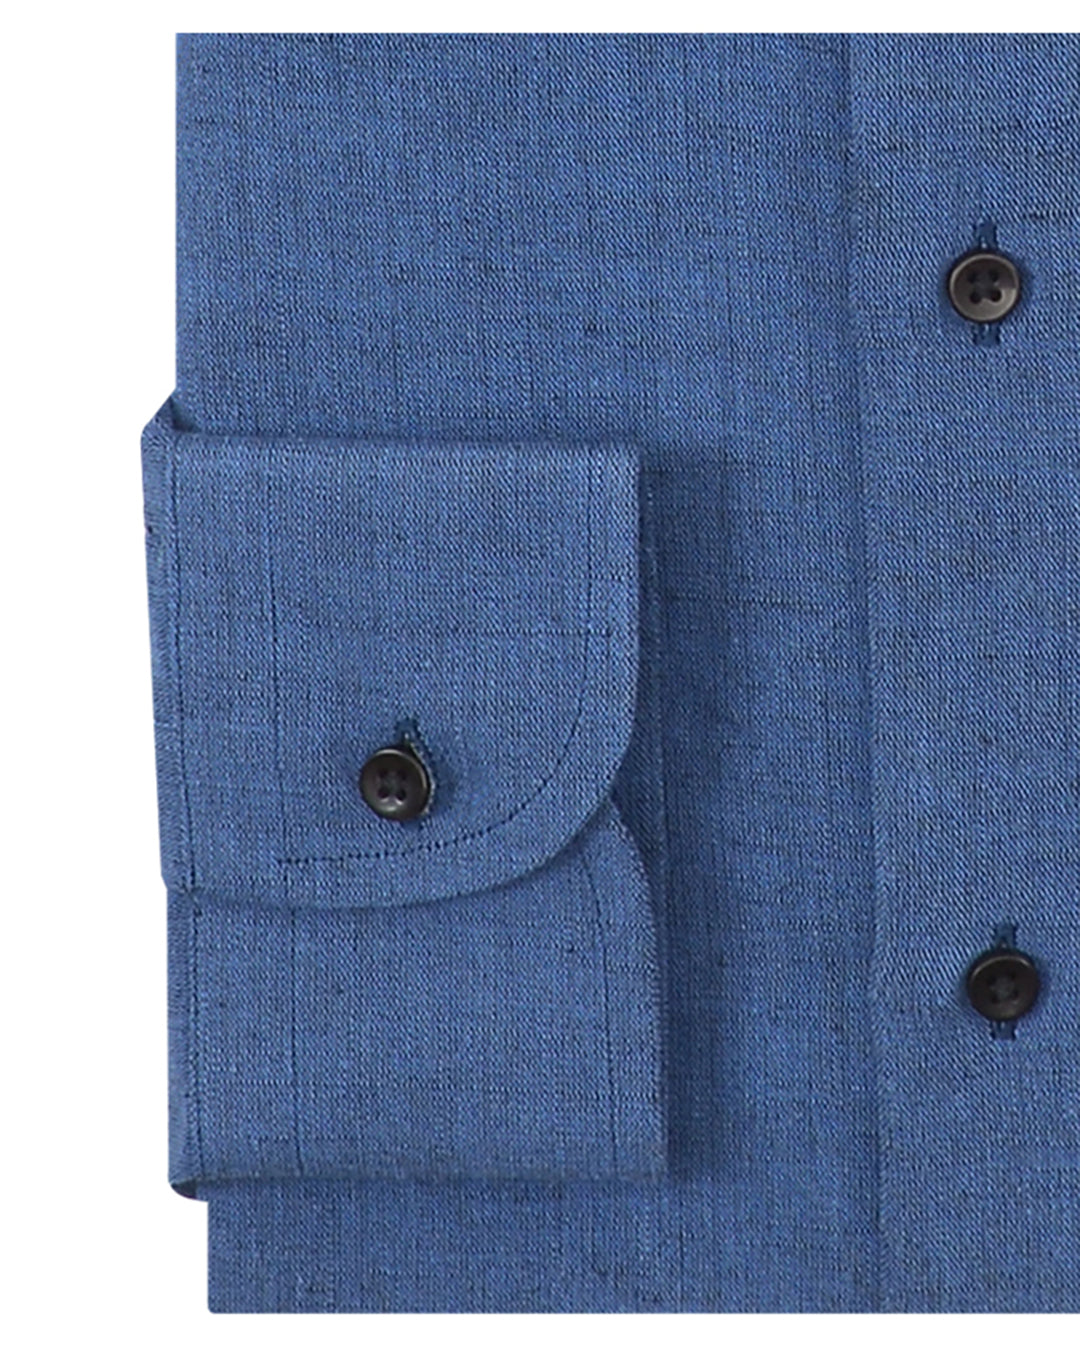 Cuff of the custom linen shirt for men in dark blue chambray by Luxire Clothing